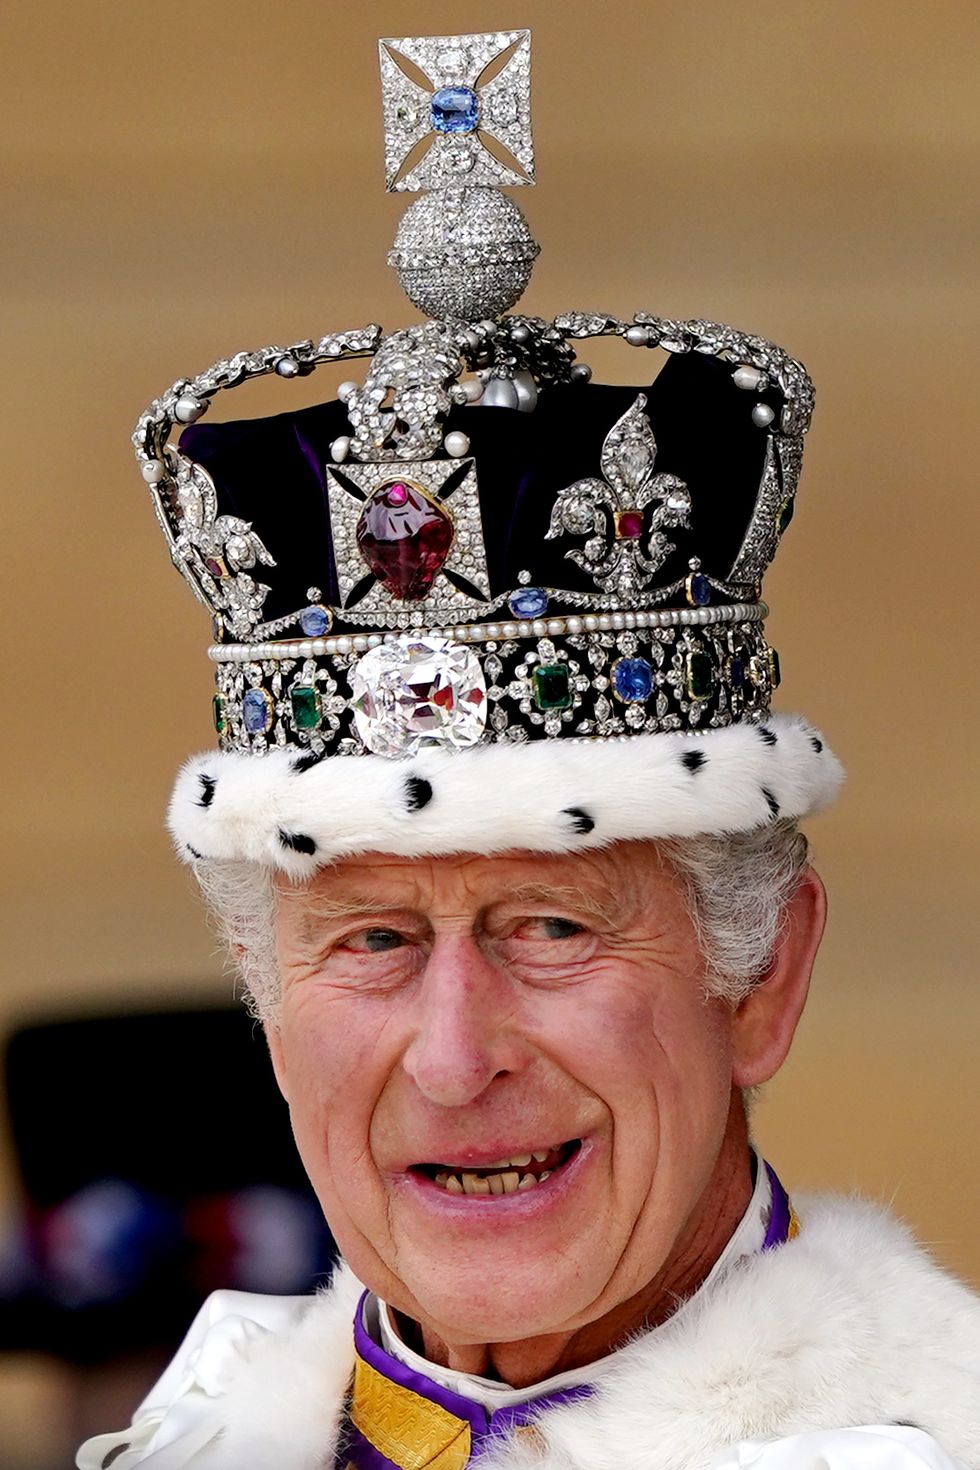 Coronation day: King Charles III, Queen Camilla crowned